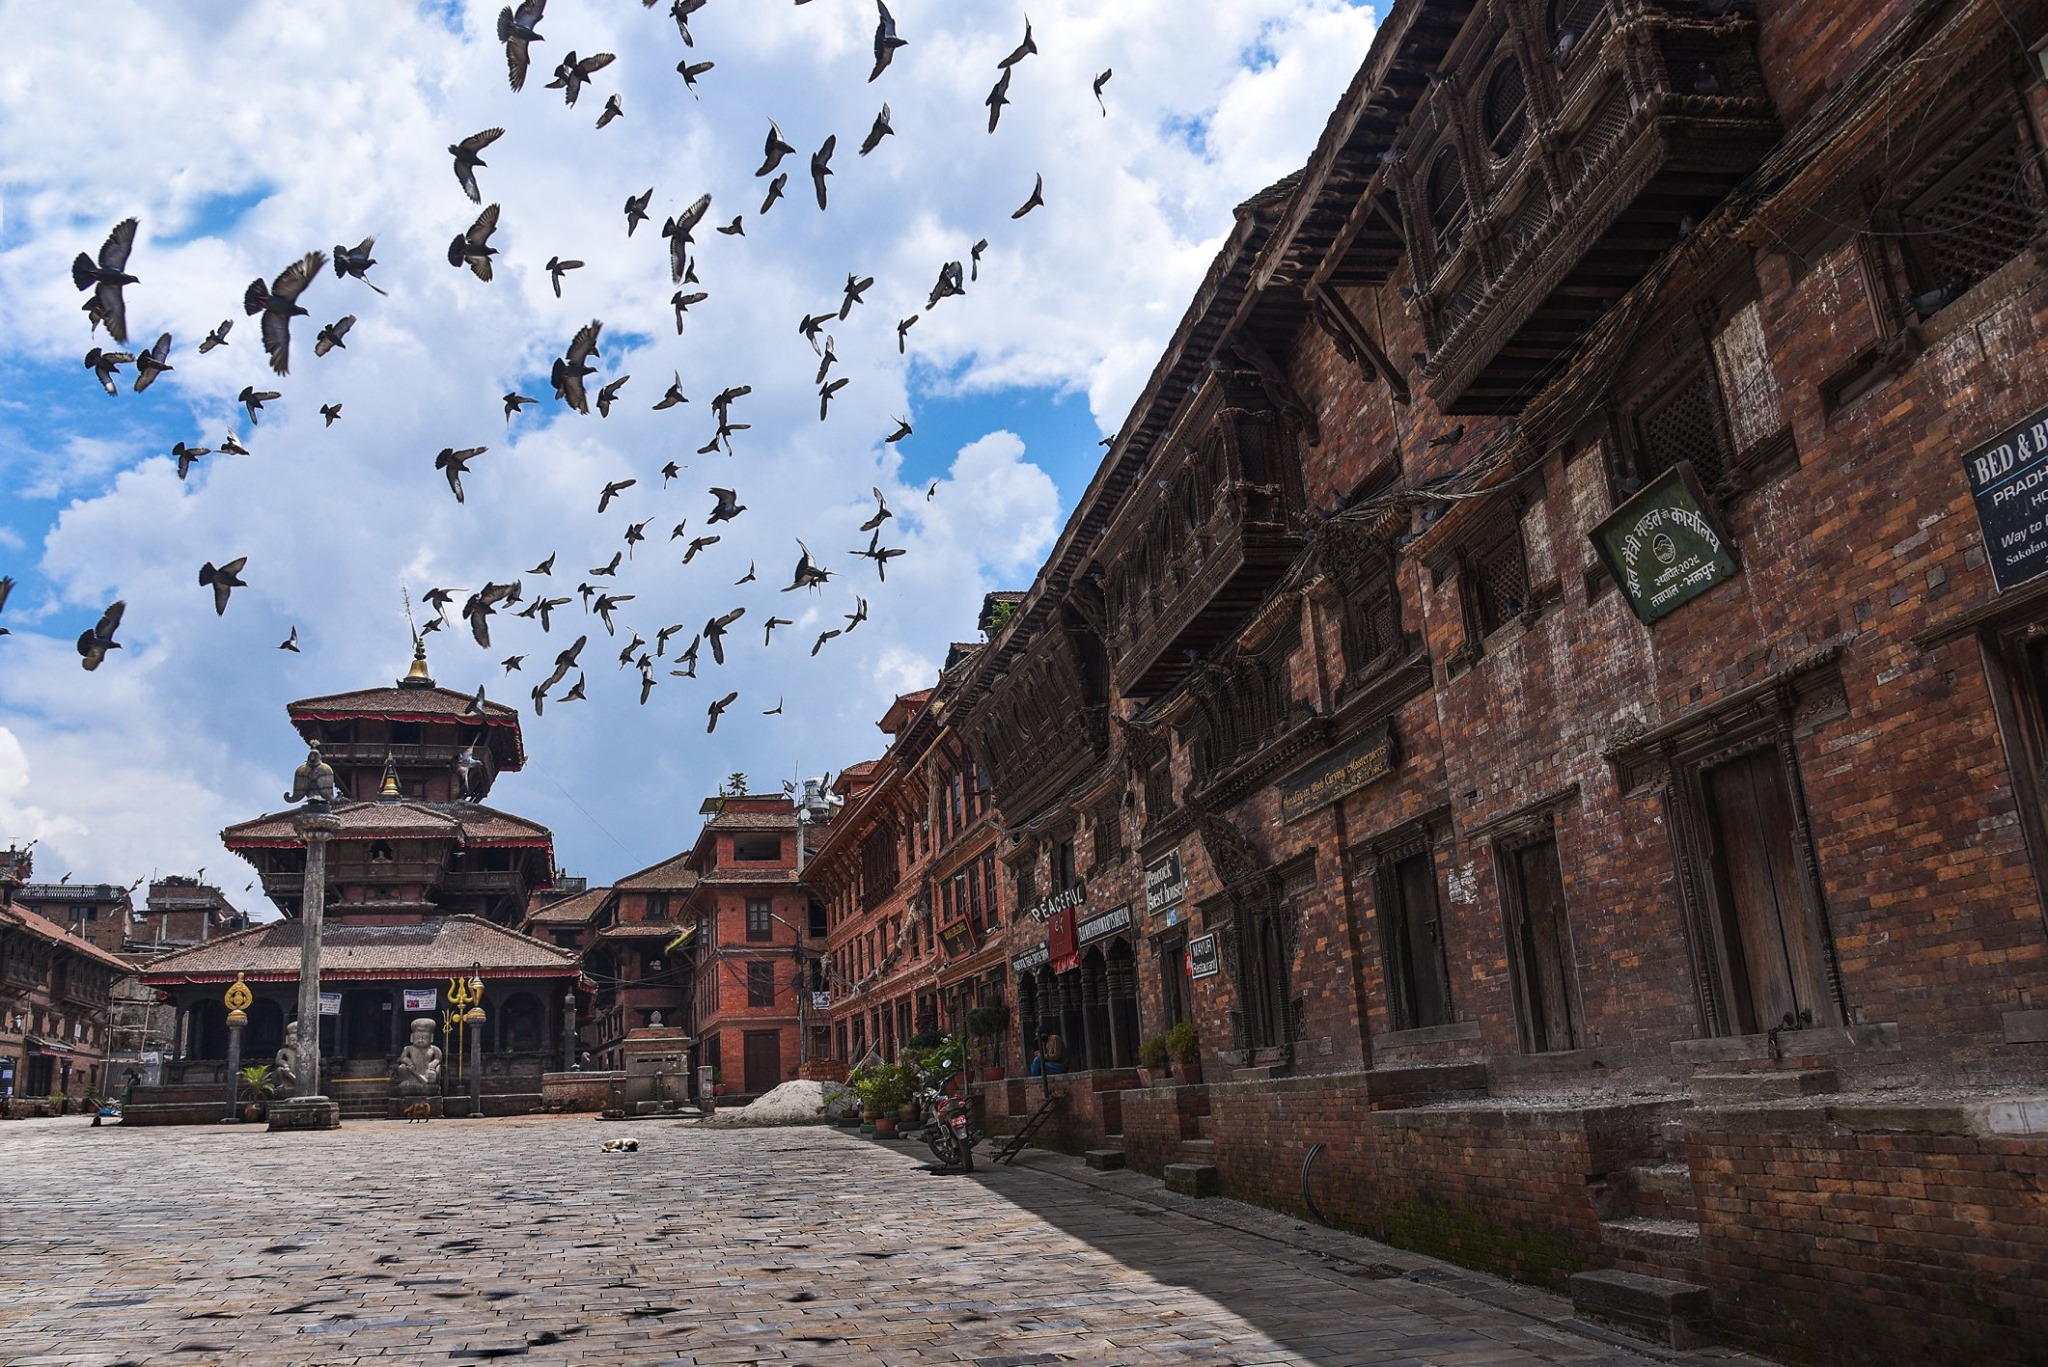 Entry fees of the heritage sites in Nepal image